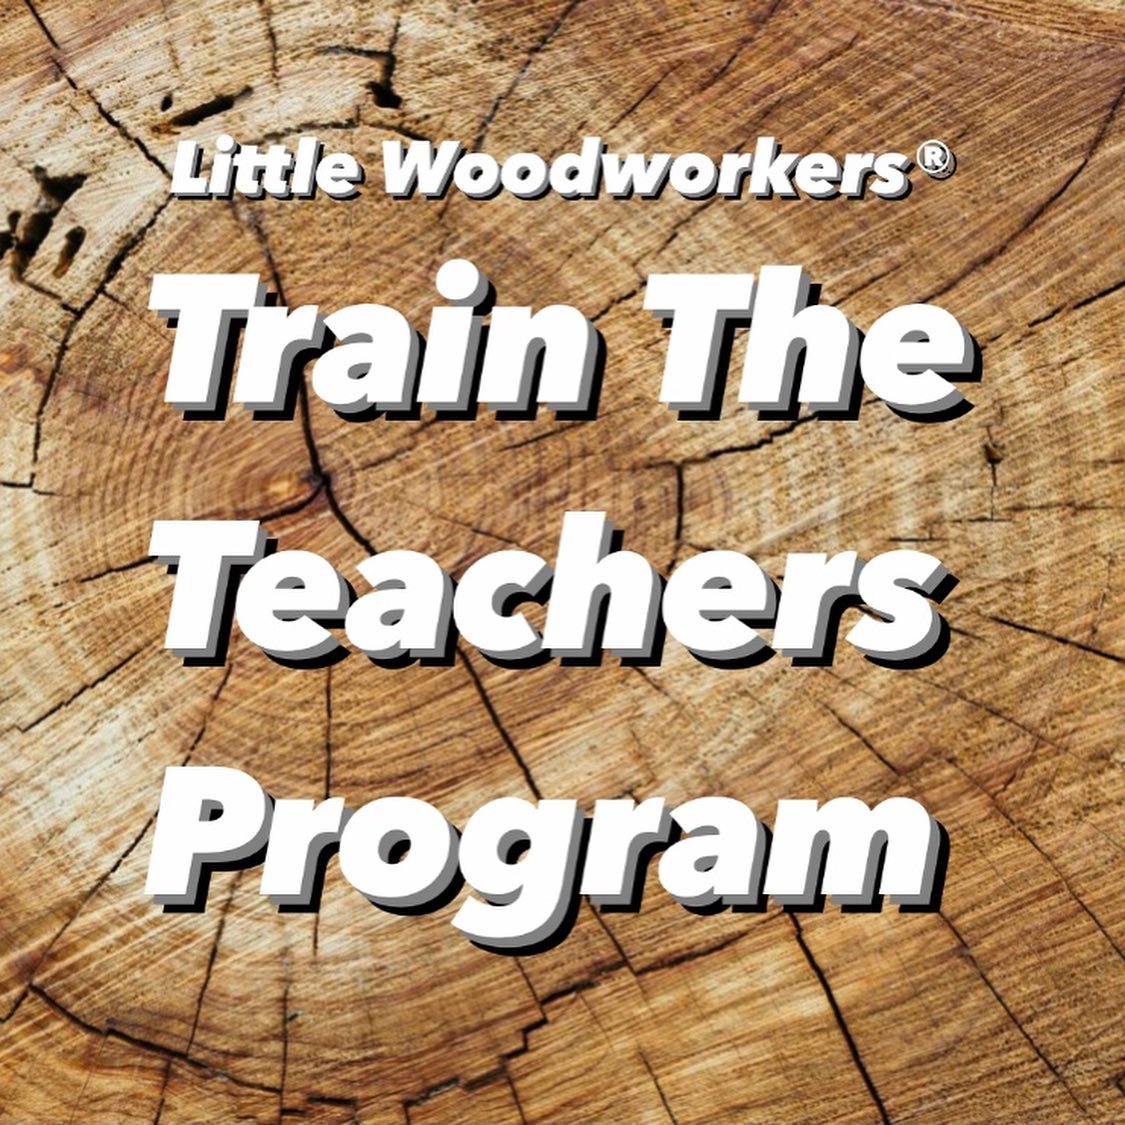 After a decade of facilitating 1,500 woodwork incursions and gathering Teacher&rsquo;s feedback, we are launching The Little Woodworkers&reg; TRAIN THE TEACHERS Program. 👨&zwj;🏫

Our aim is to empower Educators to integrate woodwork effectively int